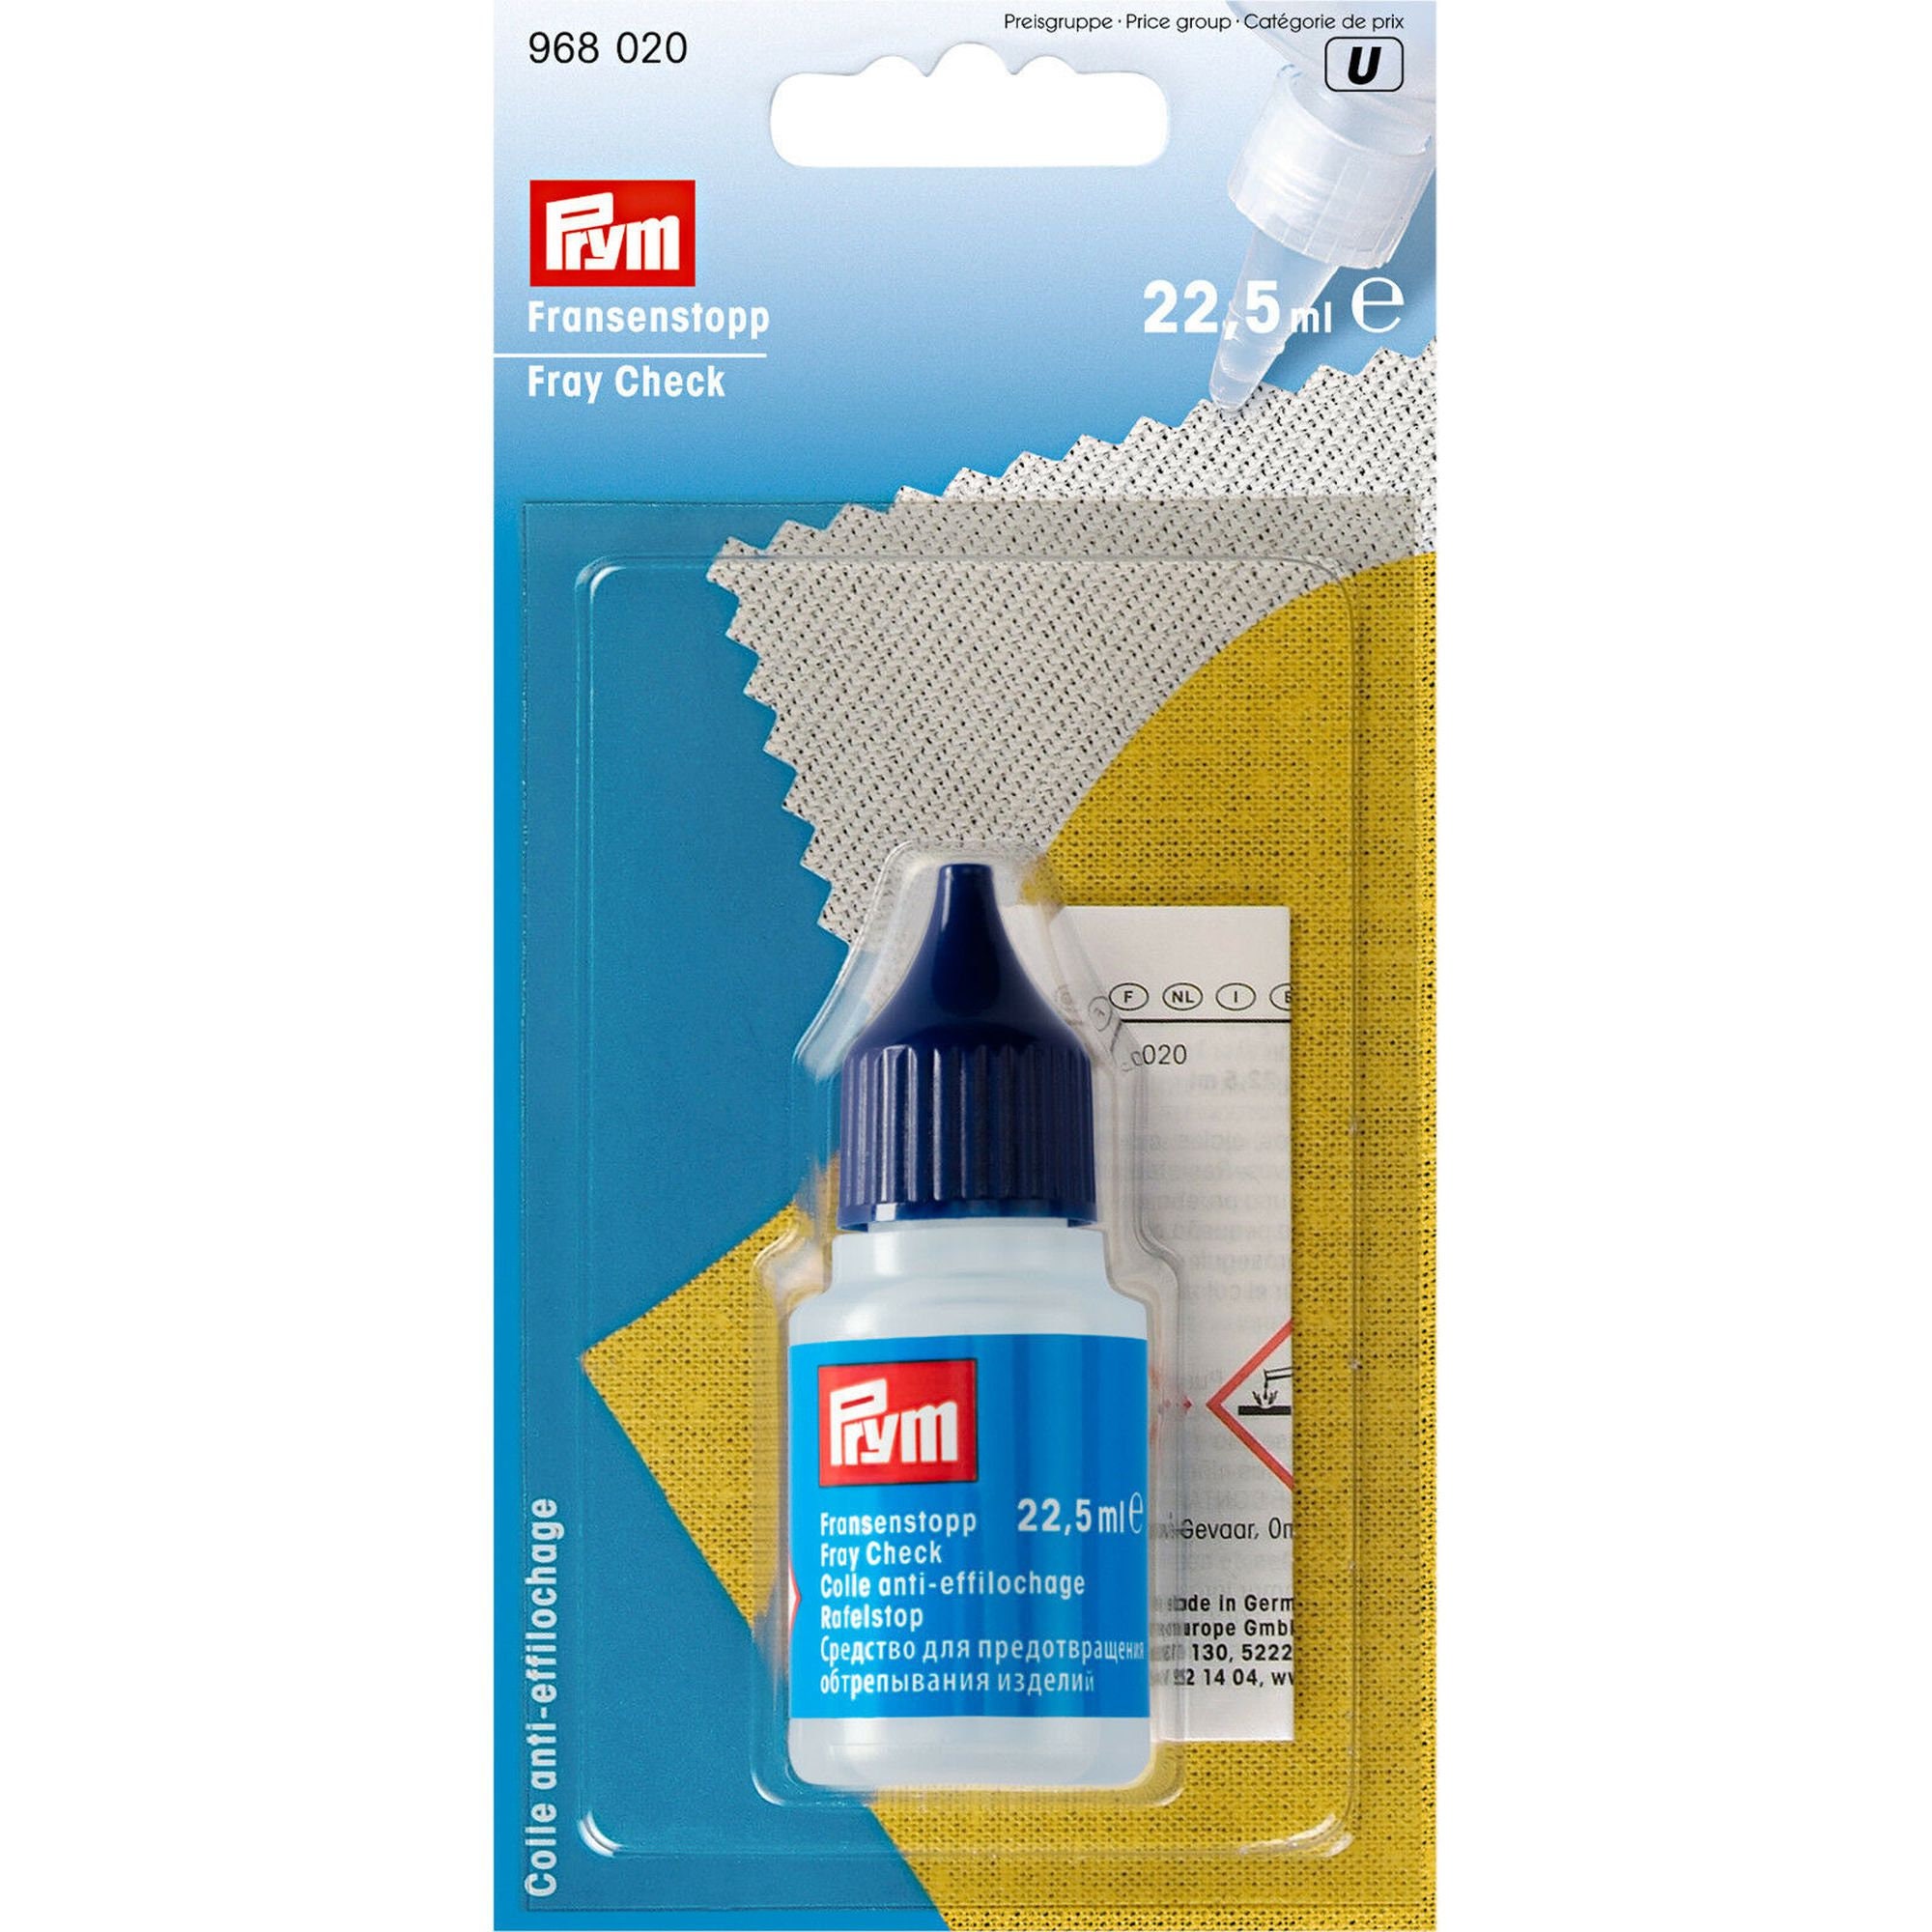 PRYM Fray Check 22.5ml - Colorless liquid prevents fraying 968020